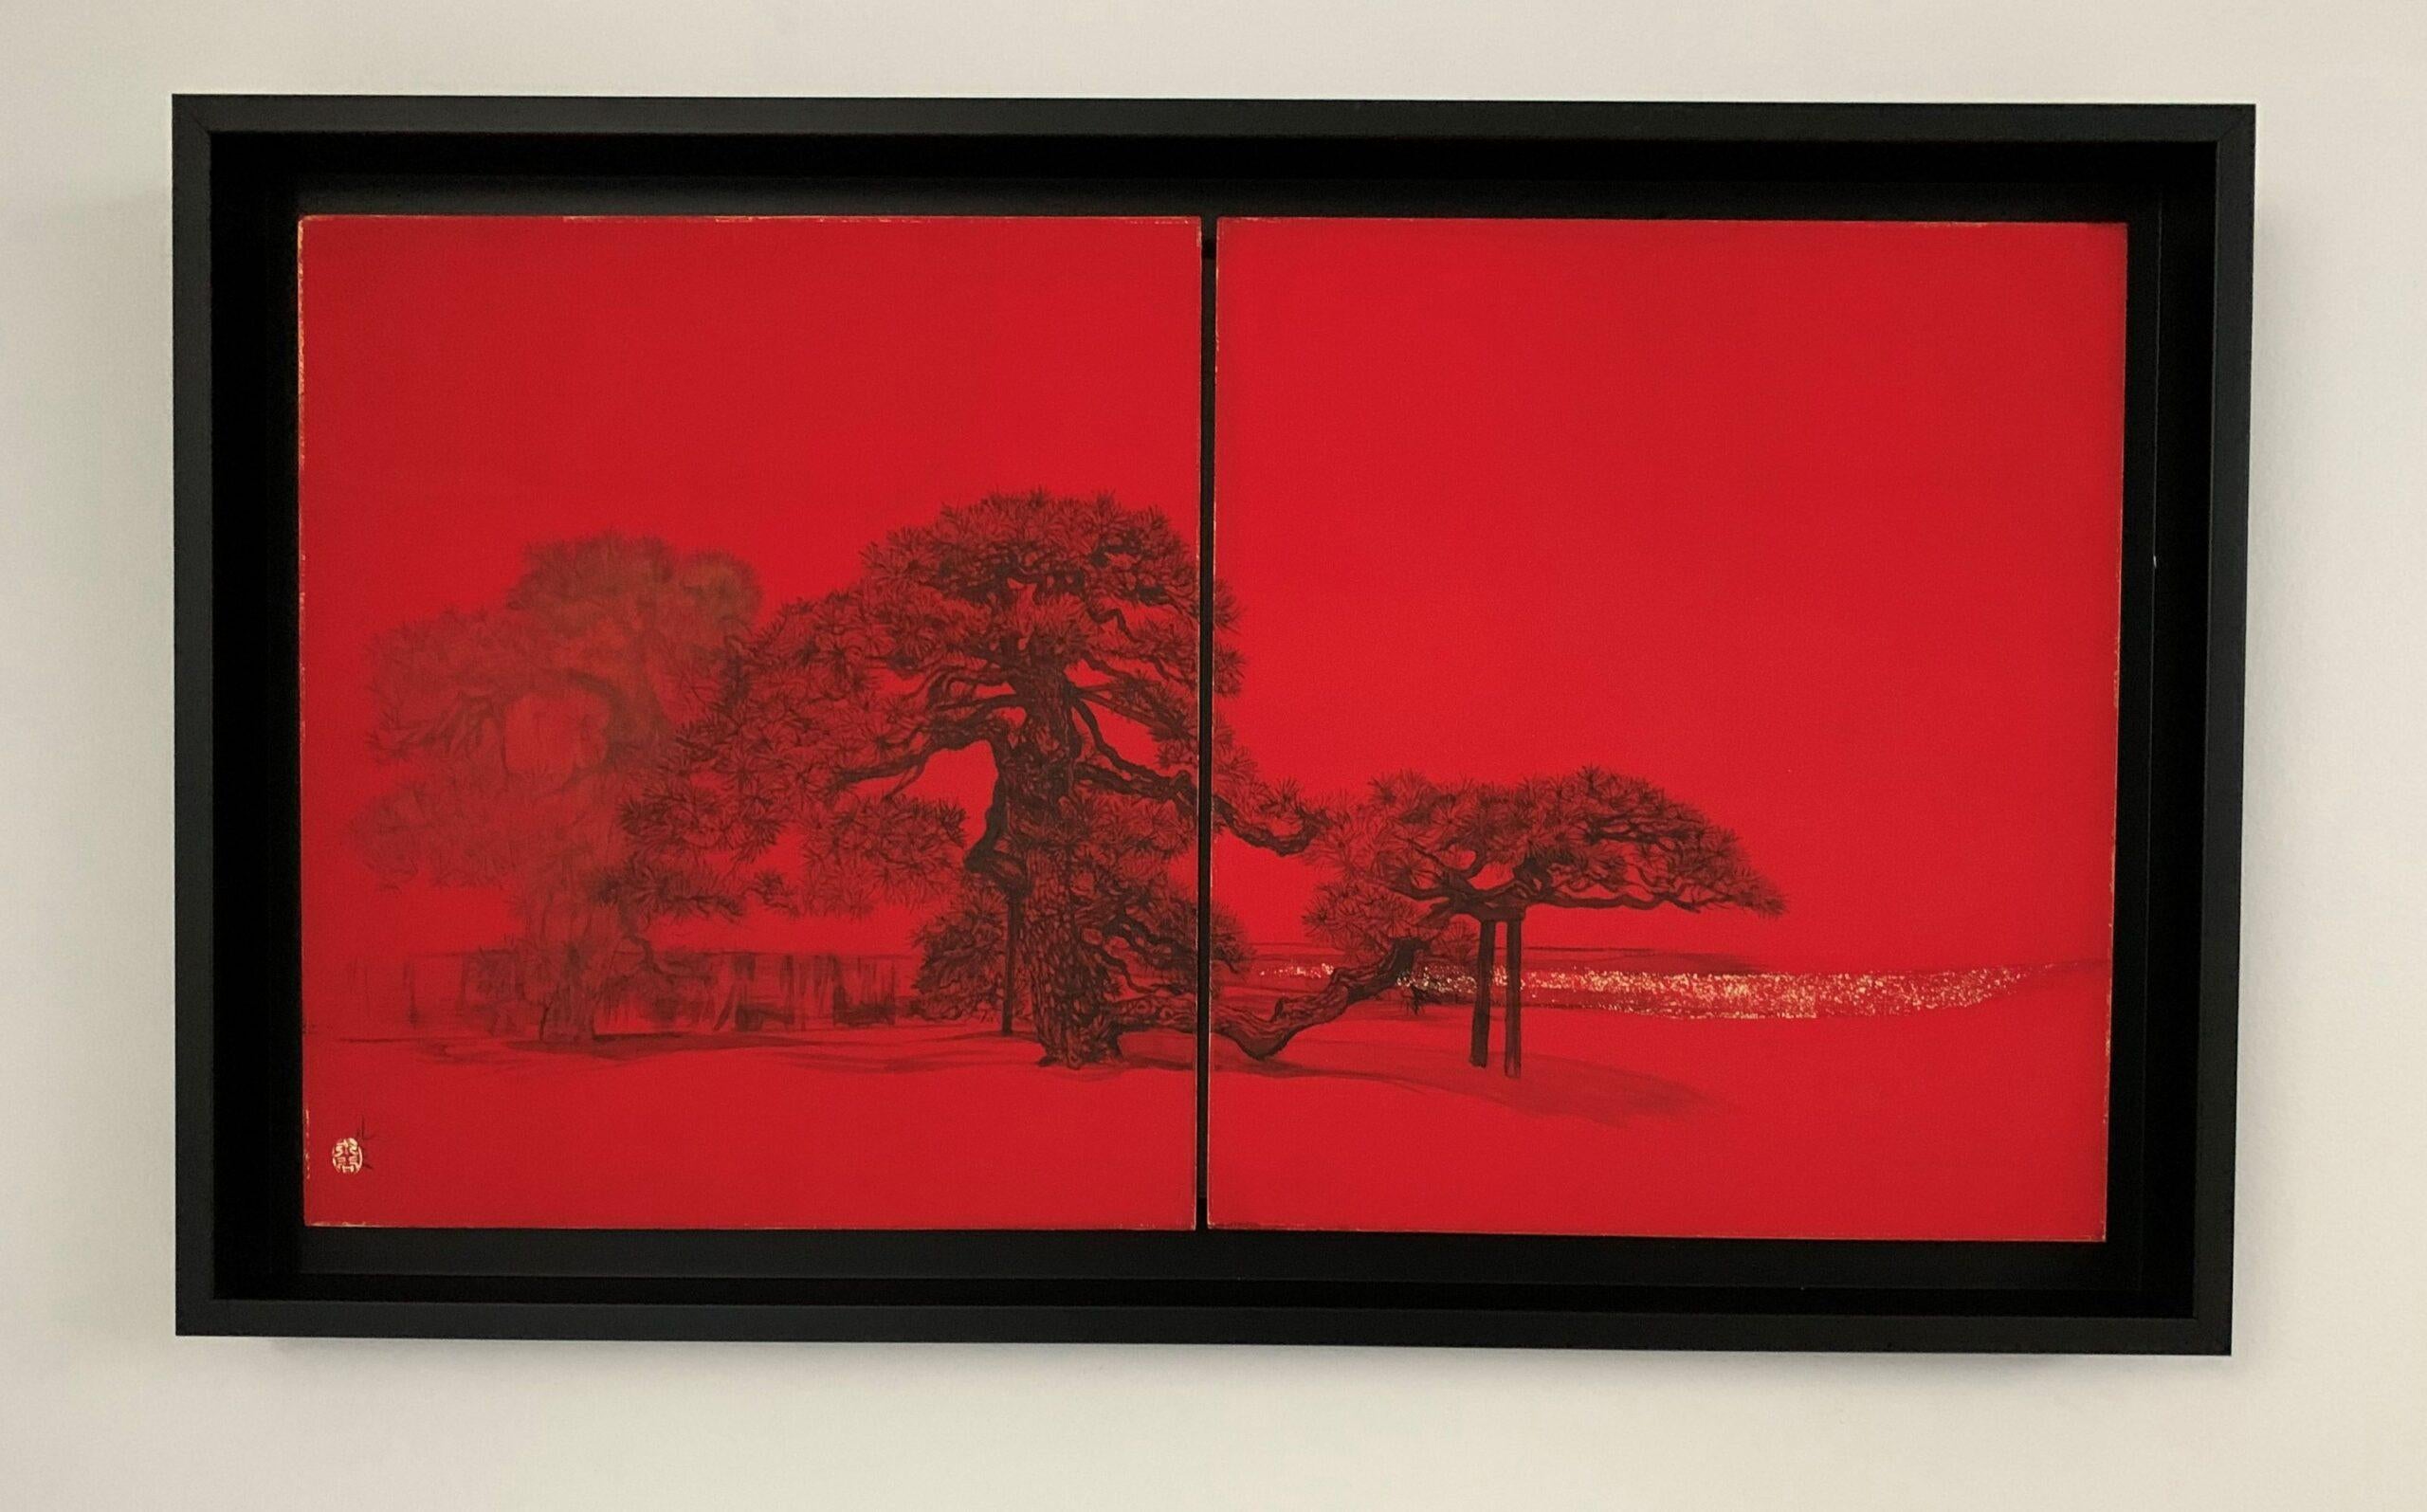 Urban landscape III by Lumi Mizutani - Japanese painting, intense red, trees For Sale 2